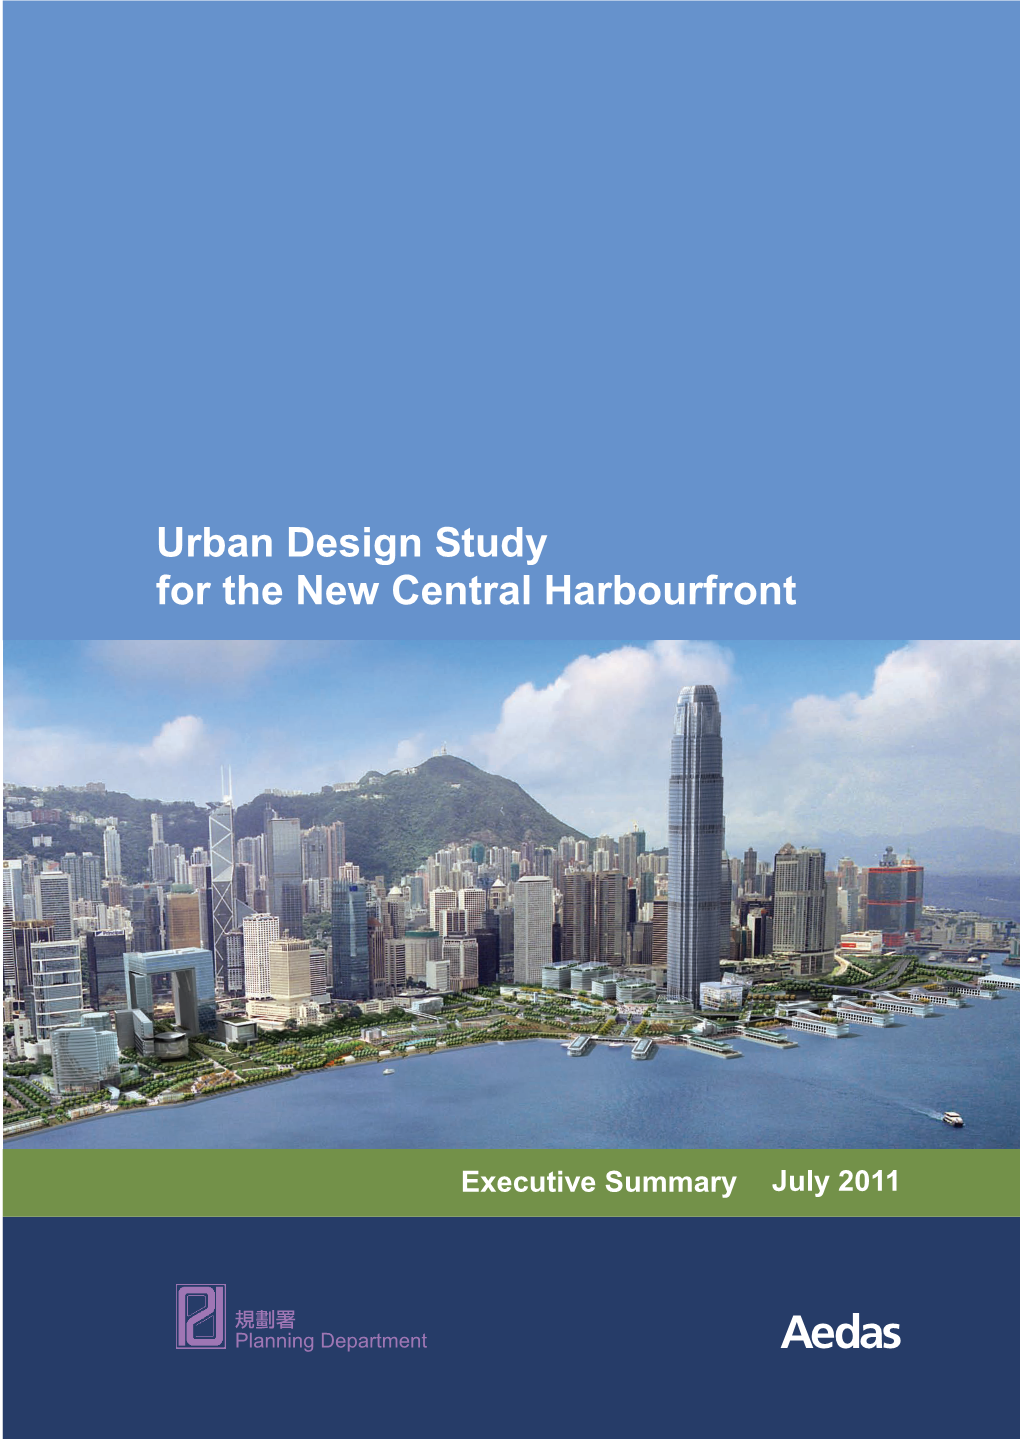 Urban Design Study for the New Central Harbourfront